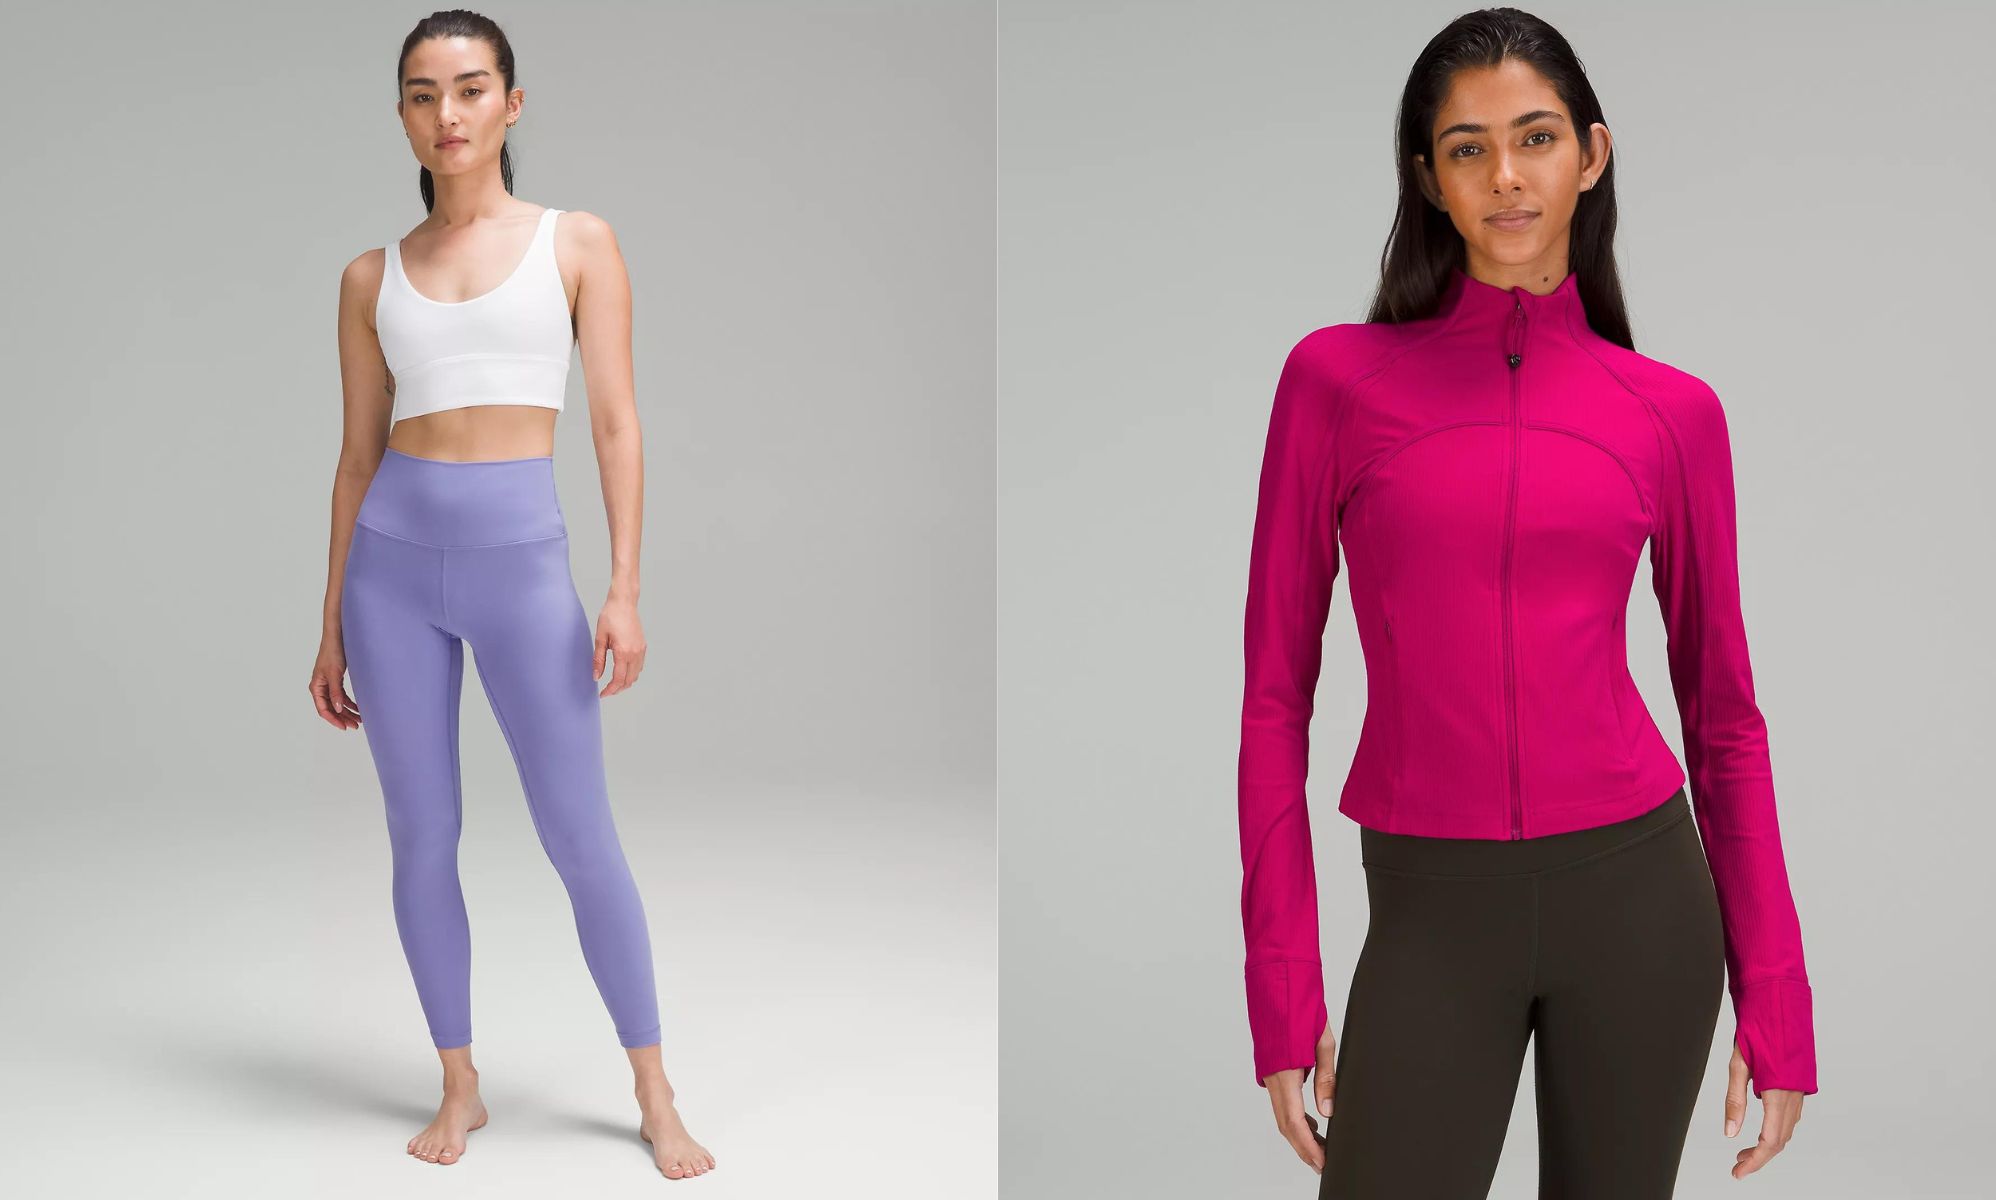 Lululemon Enters the Beauty Space With Gender-Neutral 'Self-Care